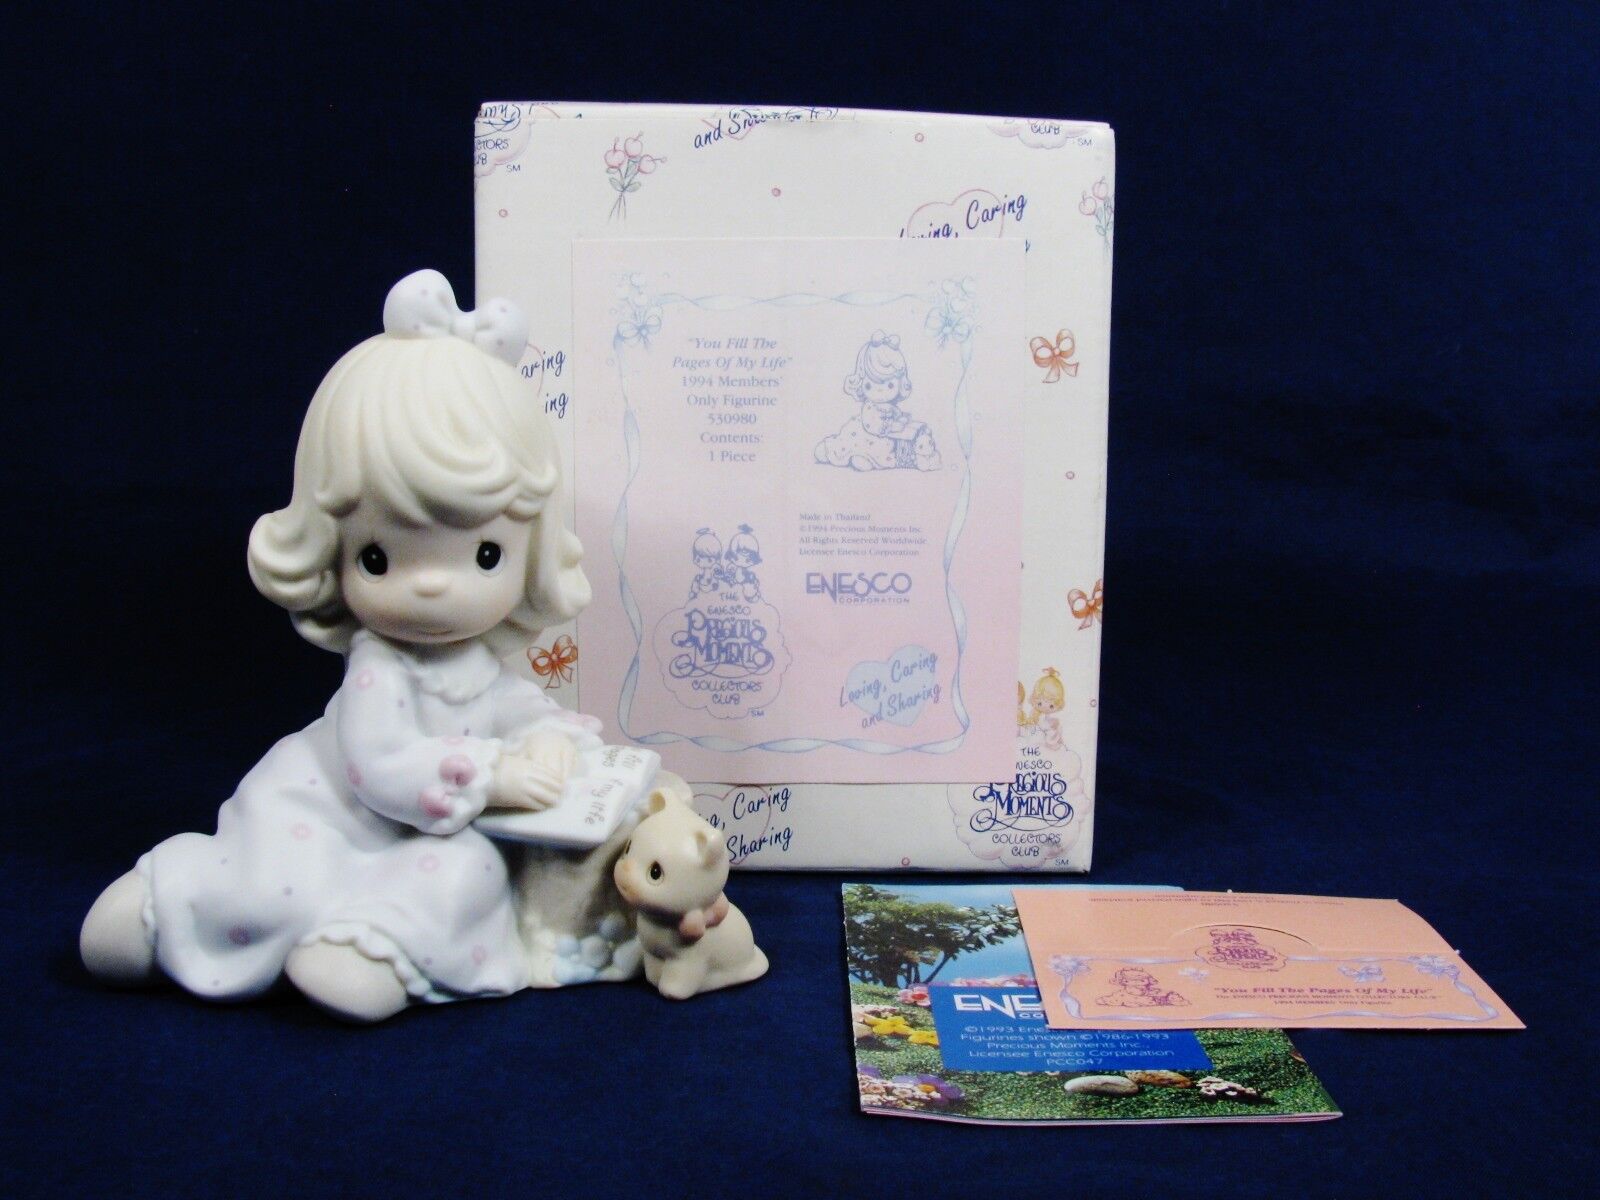 Enesco 1994 Precious Moments You Fill The Pages Of My Life Girl Figurine w/ Box